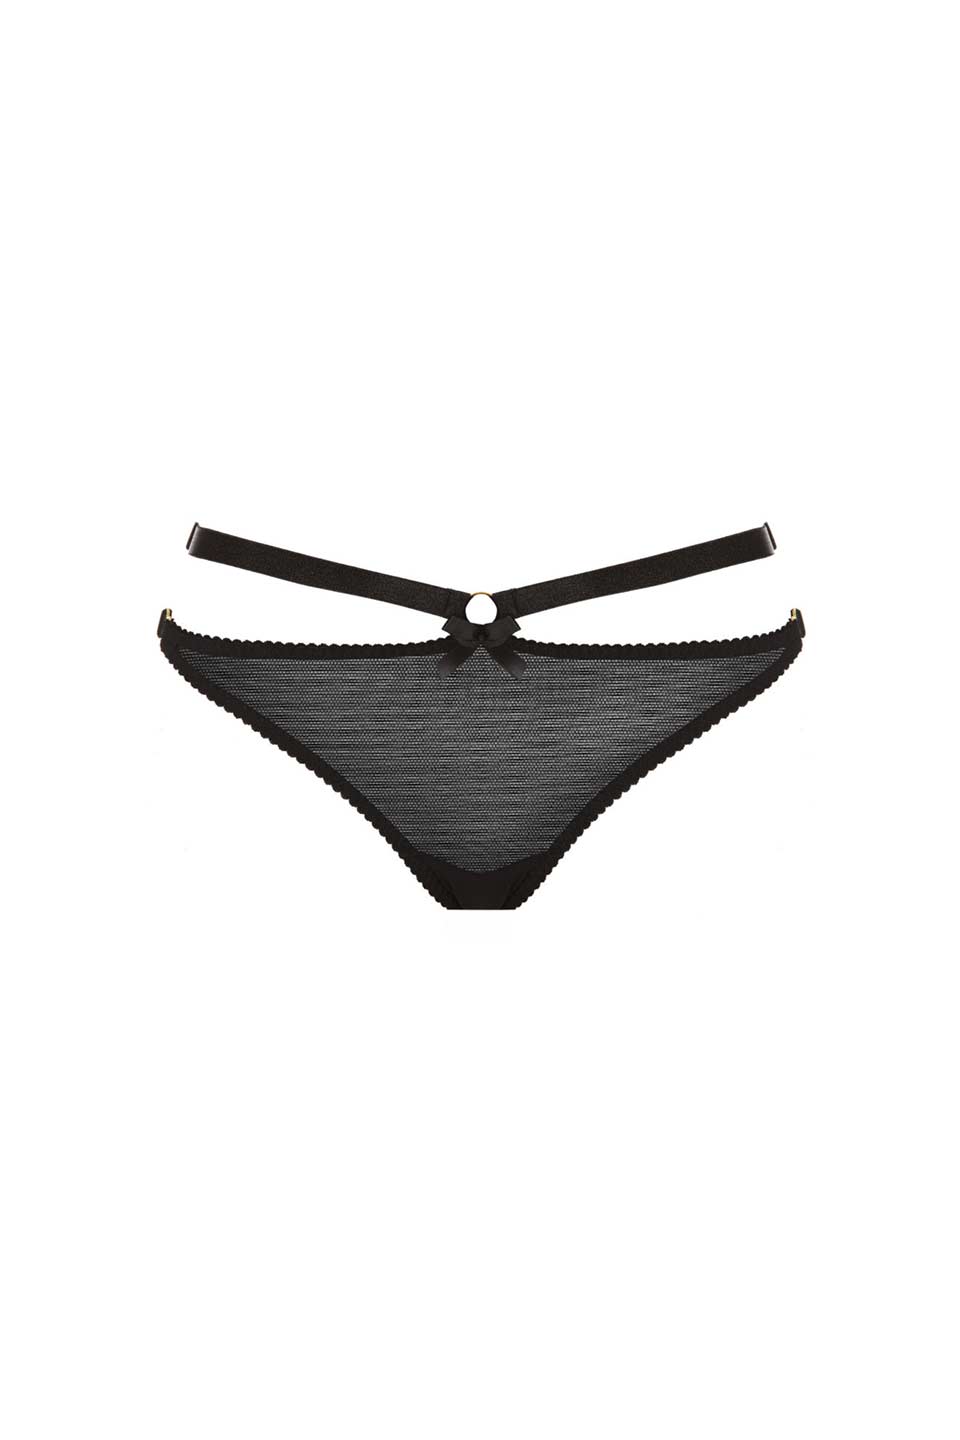 Thumbnail for Product gallery 1, Atelier bordelle harness thong black front